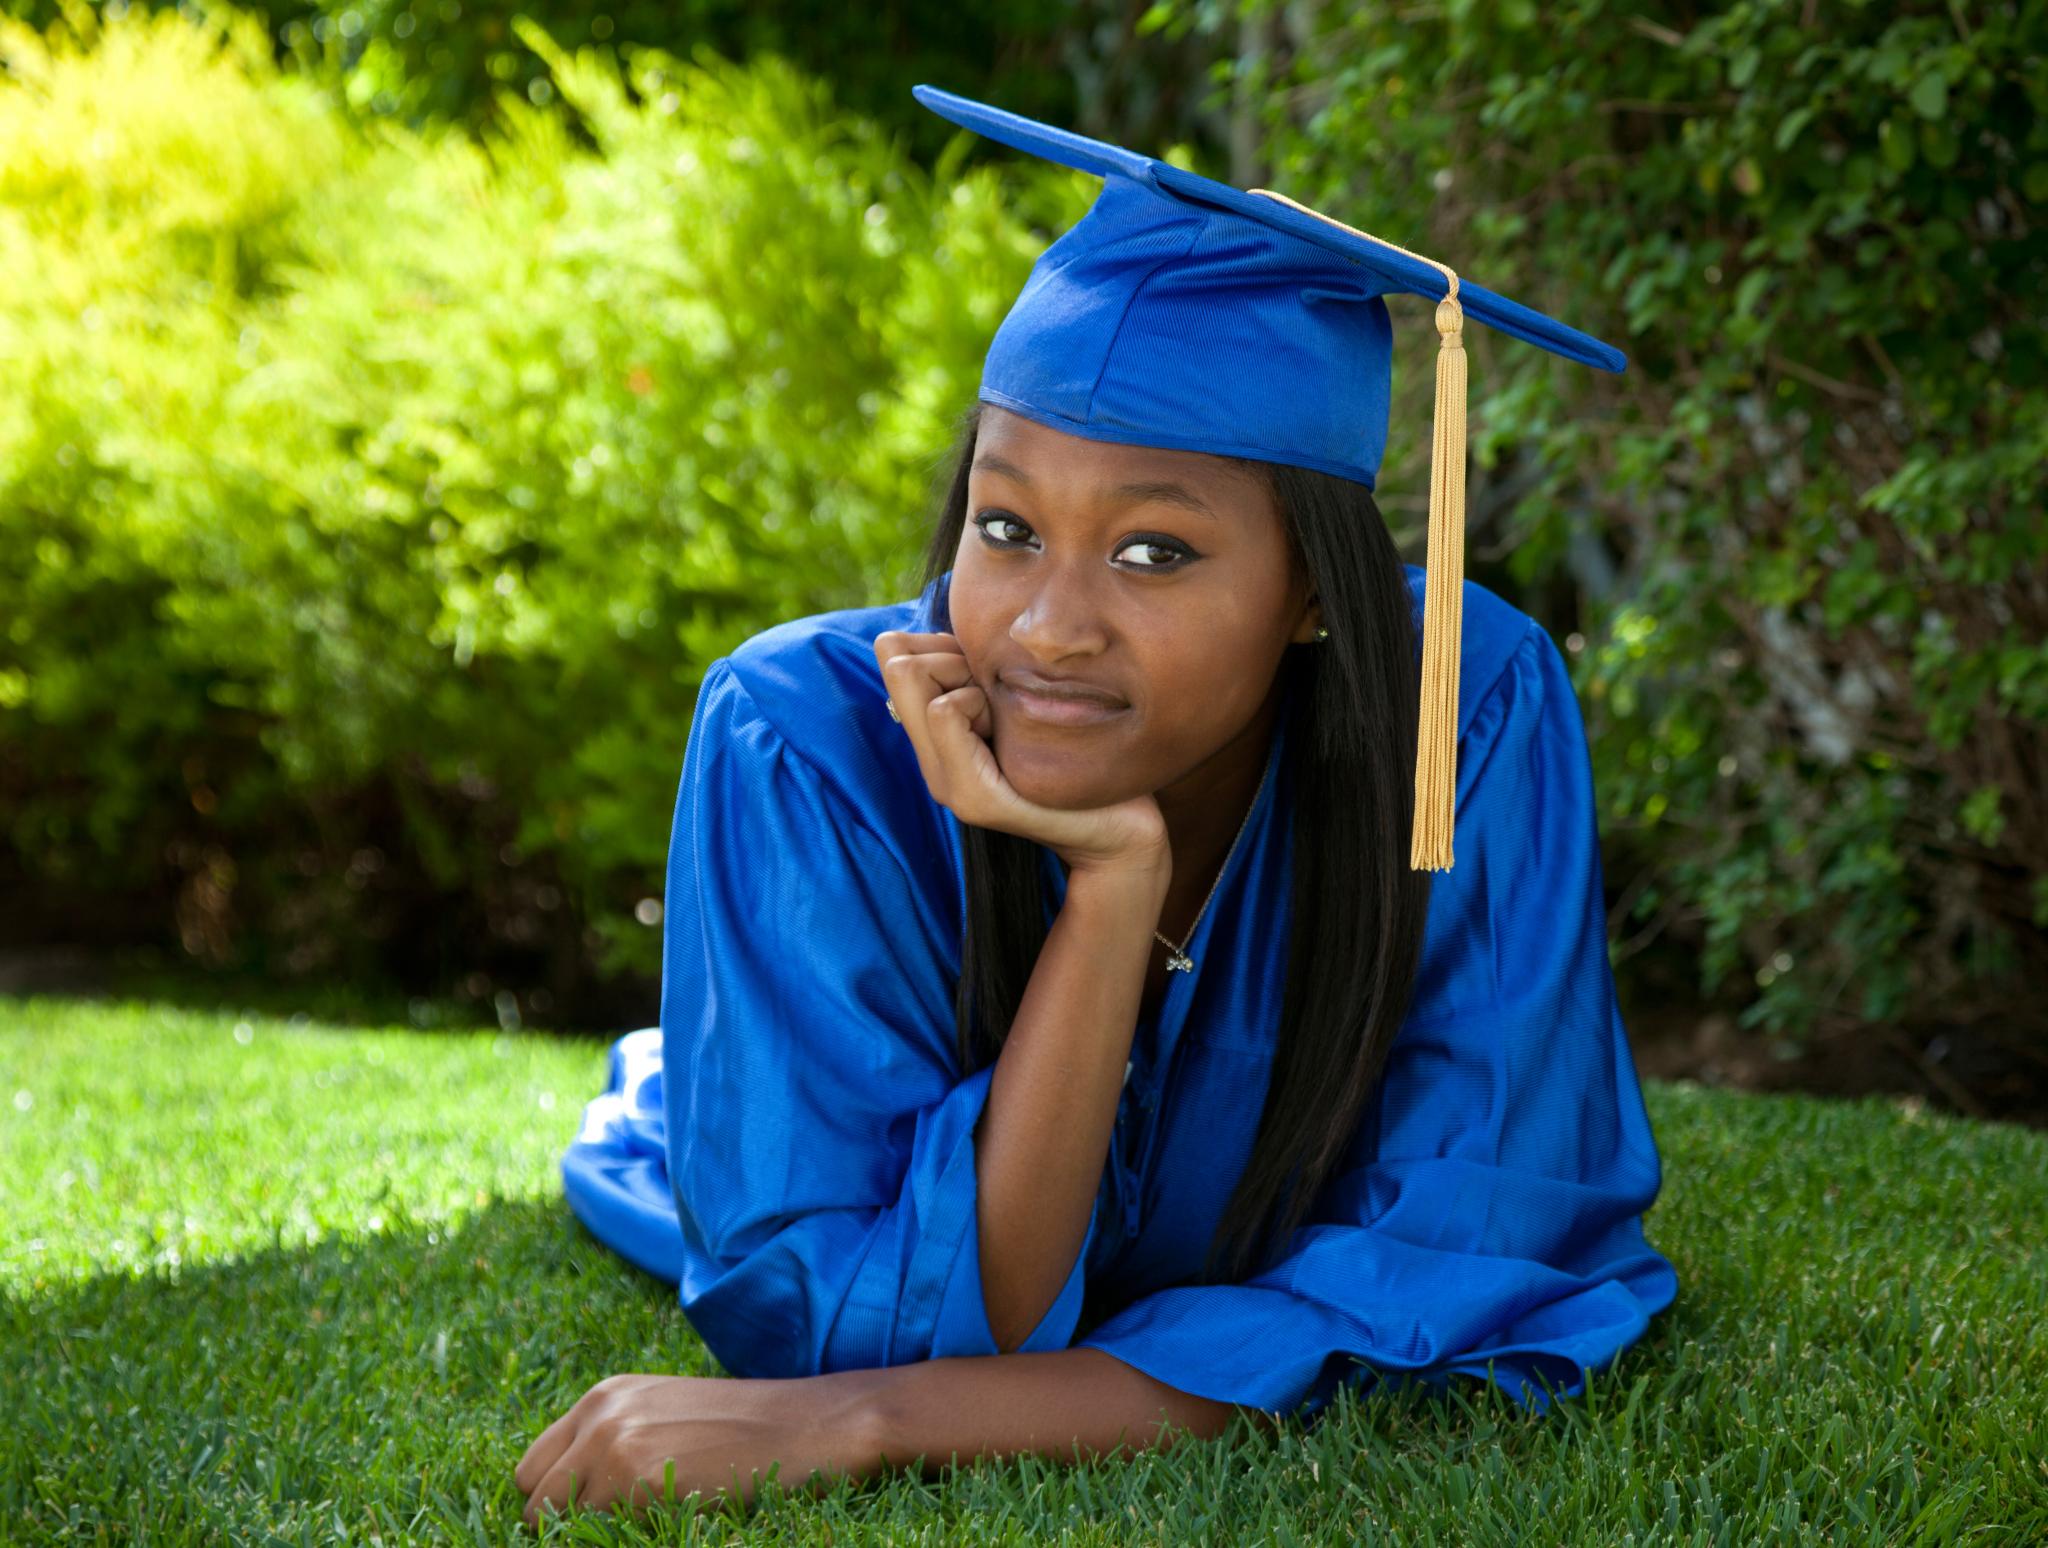 If You Could Tell Your Younger Self One Thing on College Graduation Day, What Would it Be?